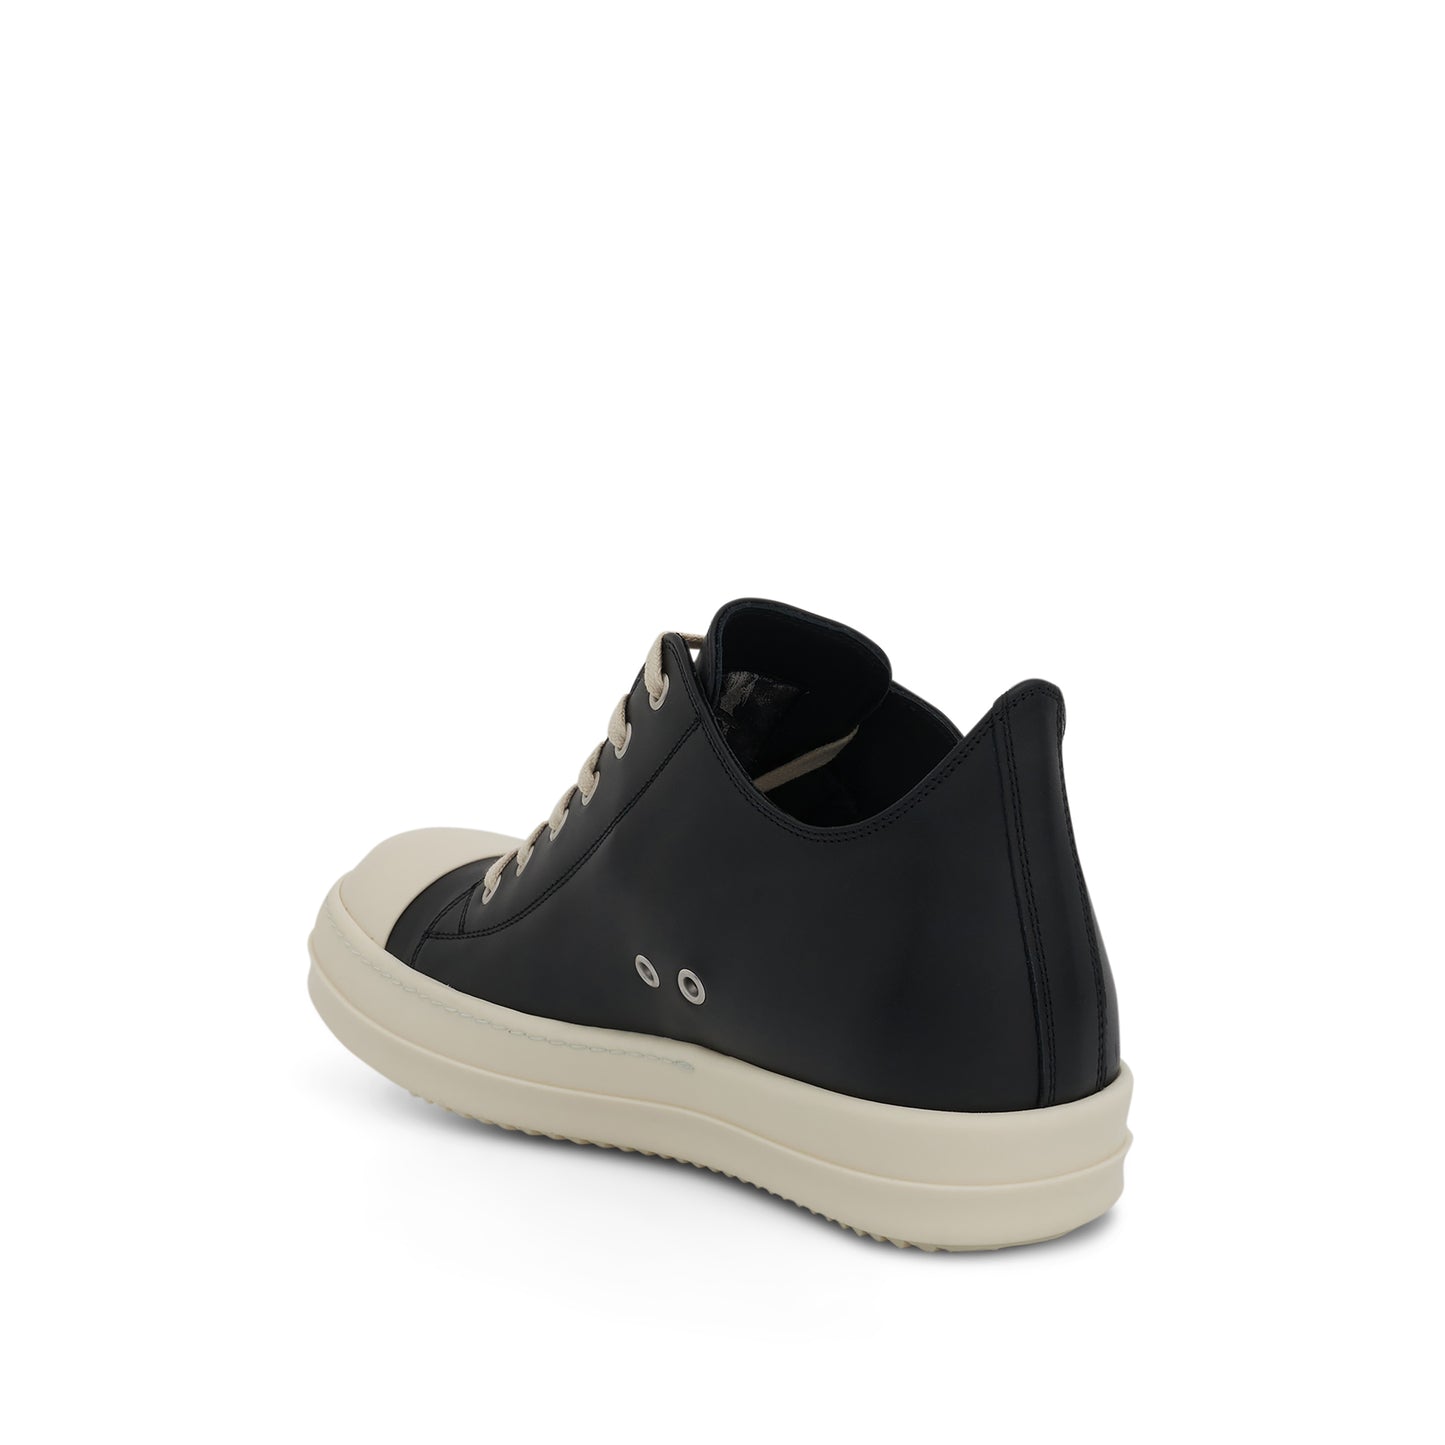 Classic Low Leather Sneakers in Black/Milk